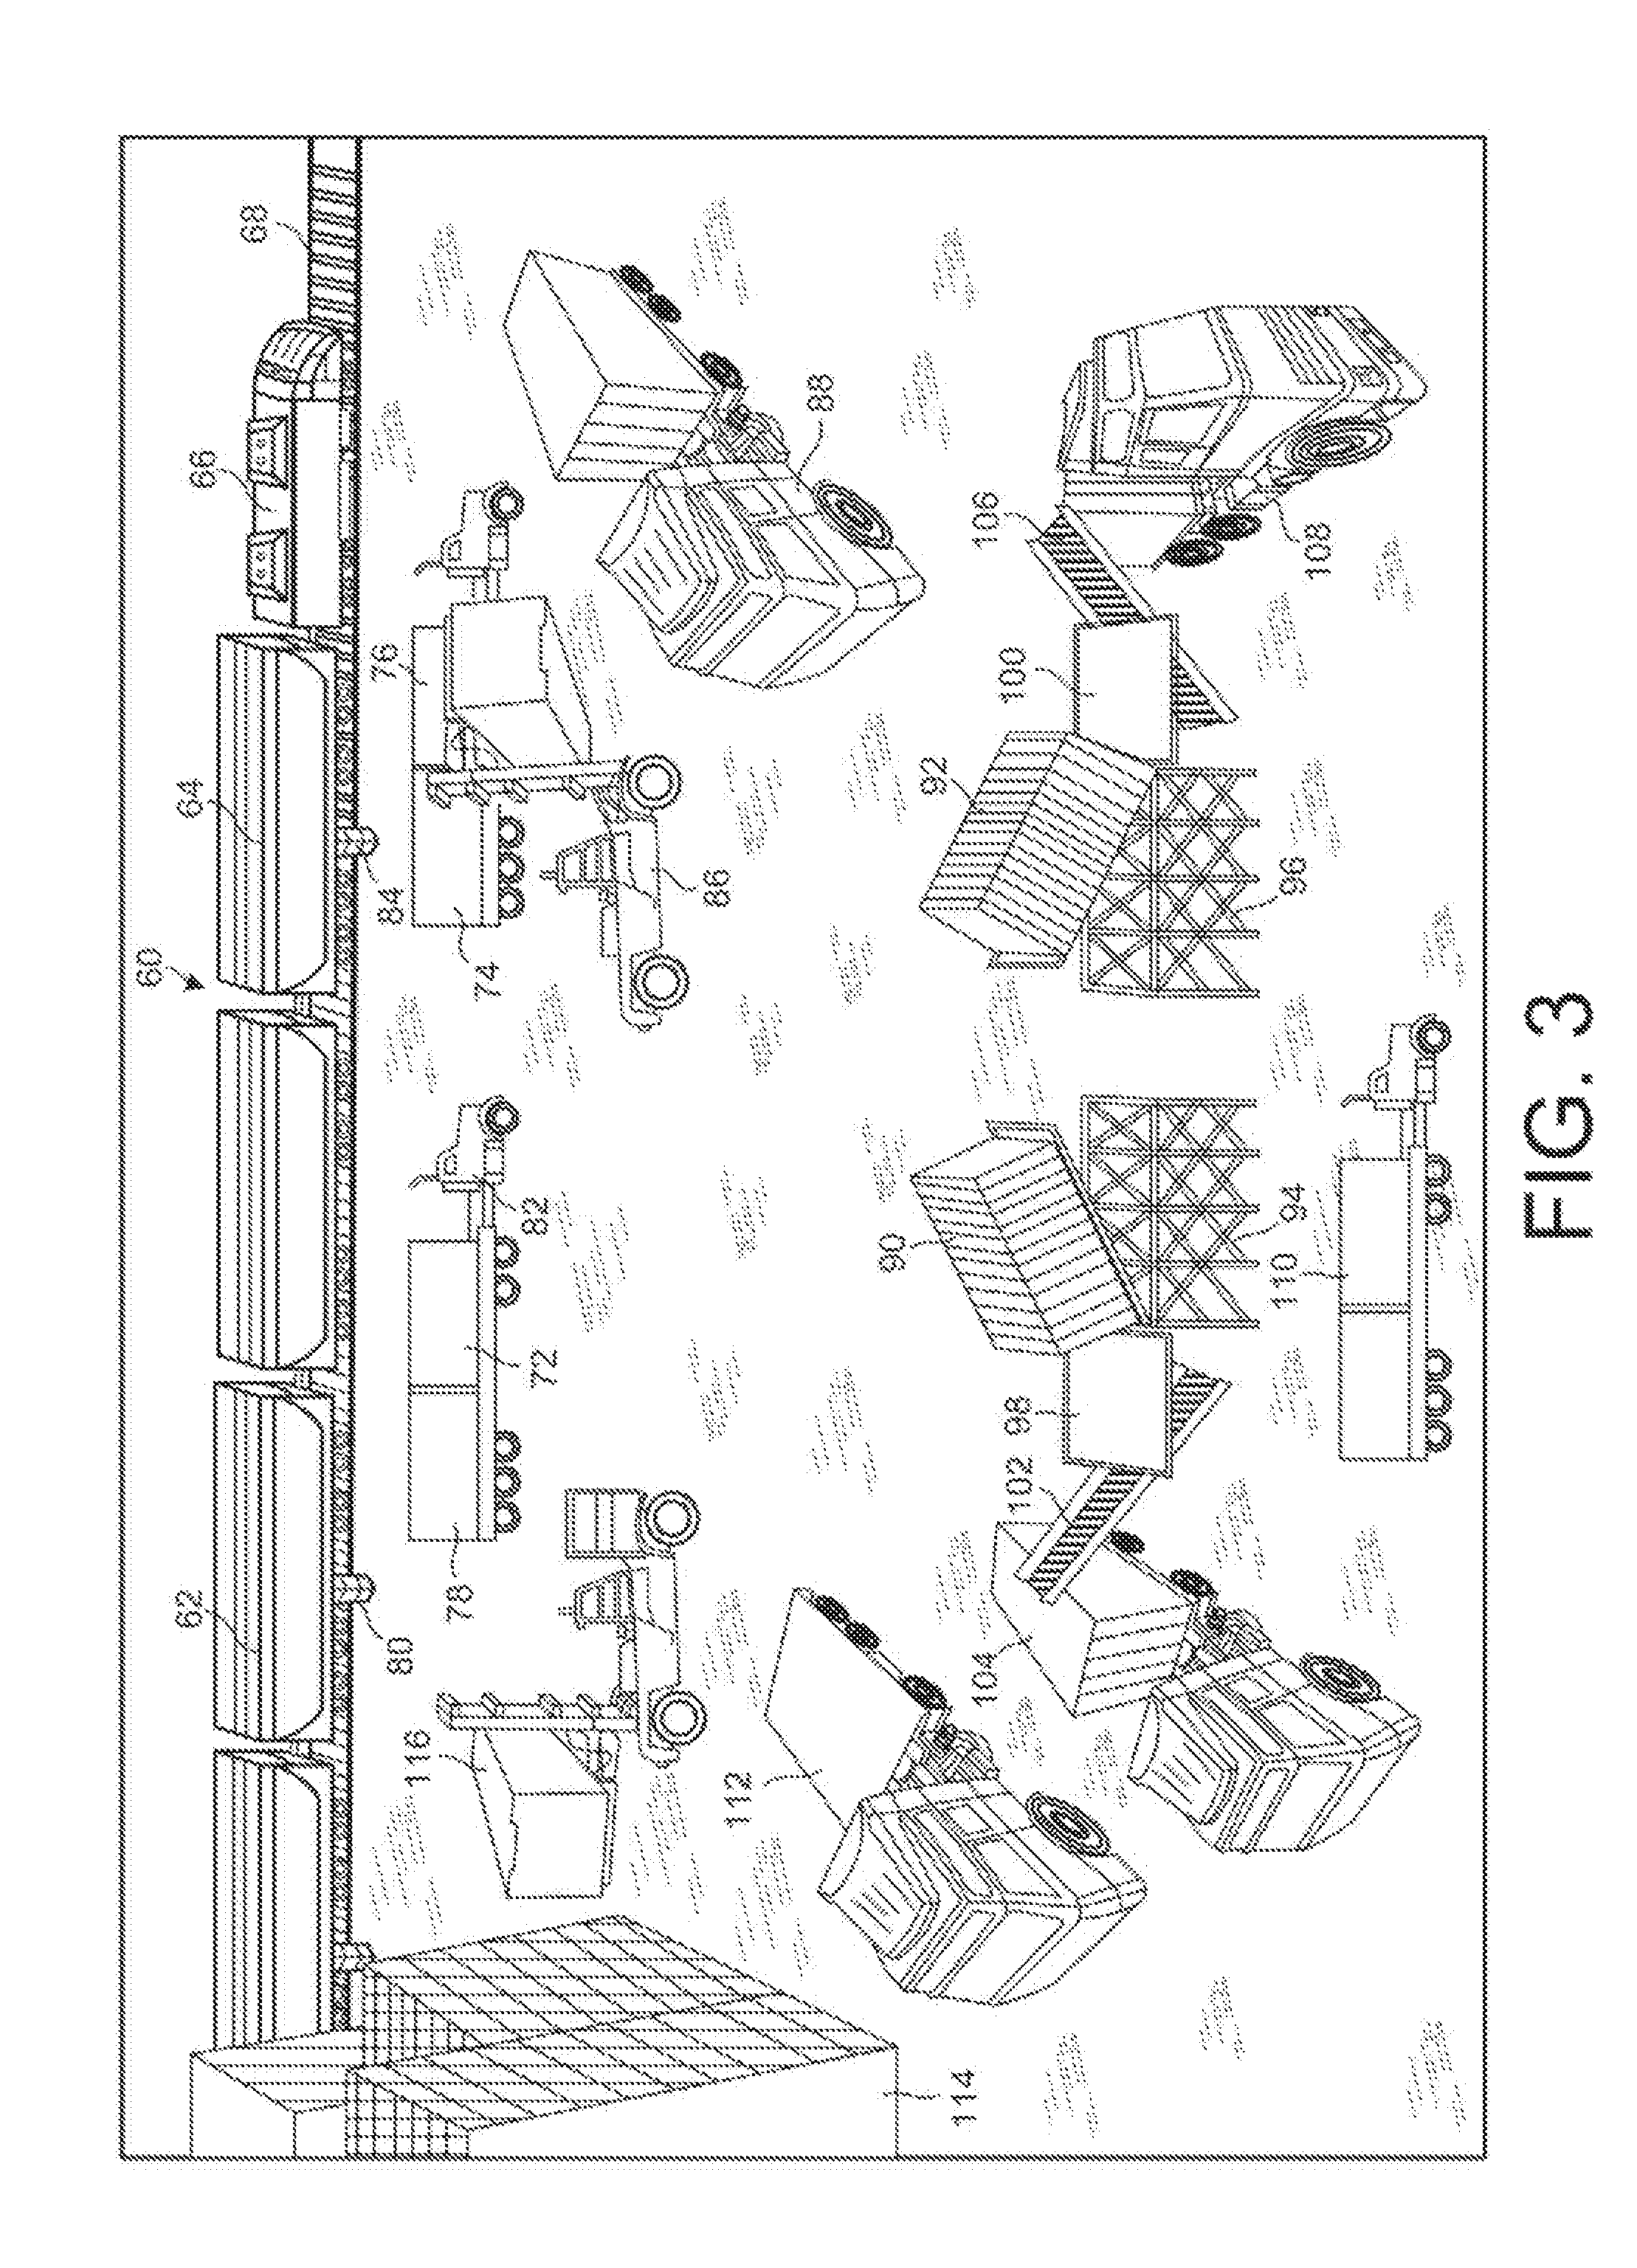 Methods of storing and moving proppant at location adjacent rail line